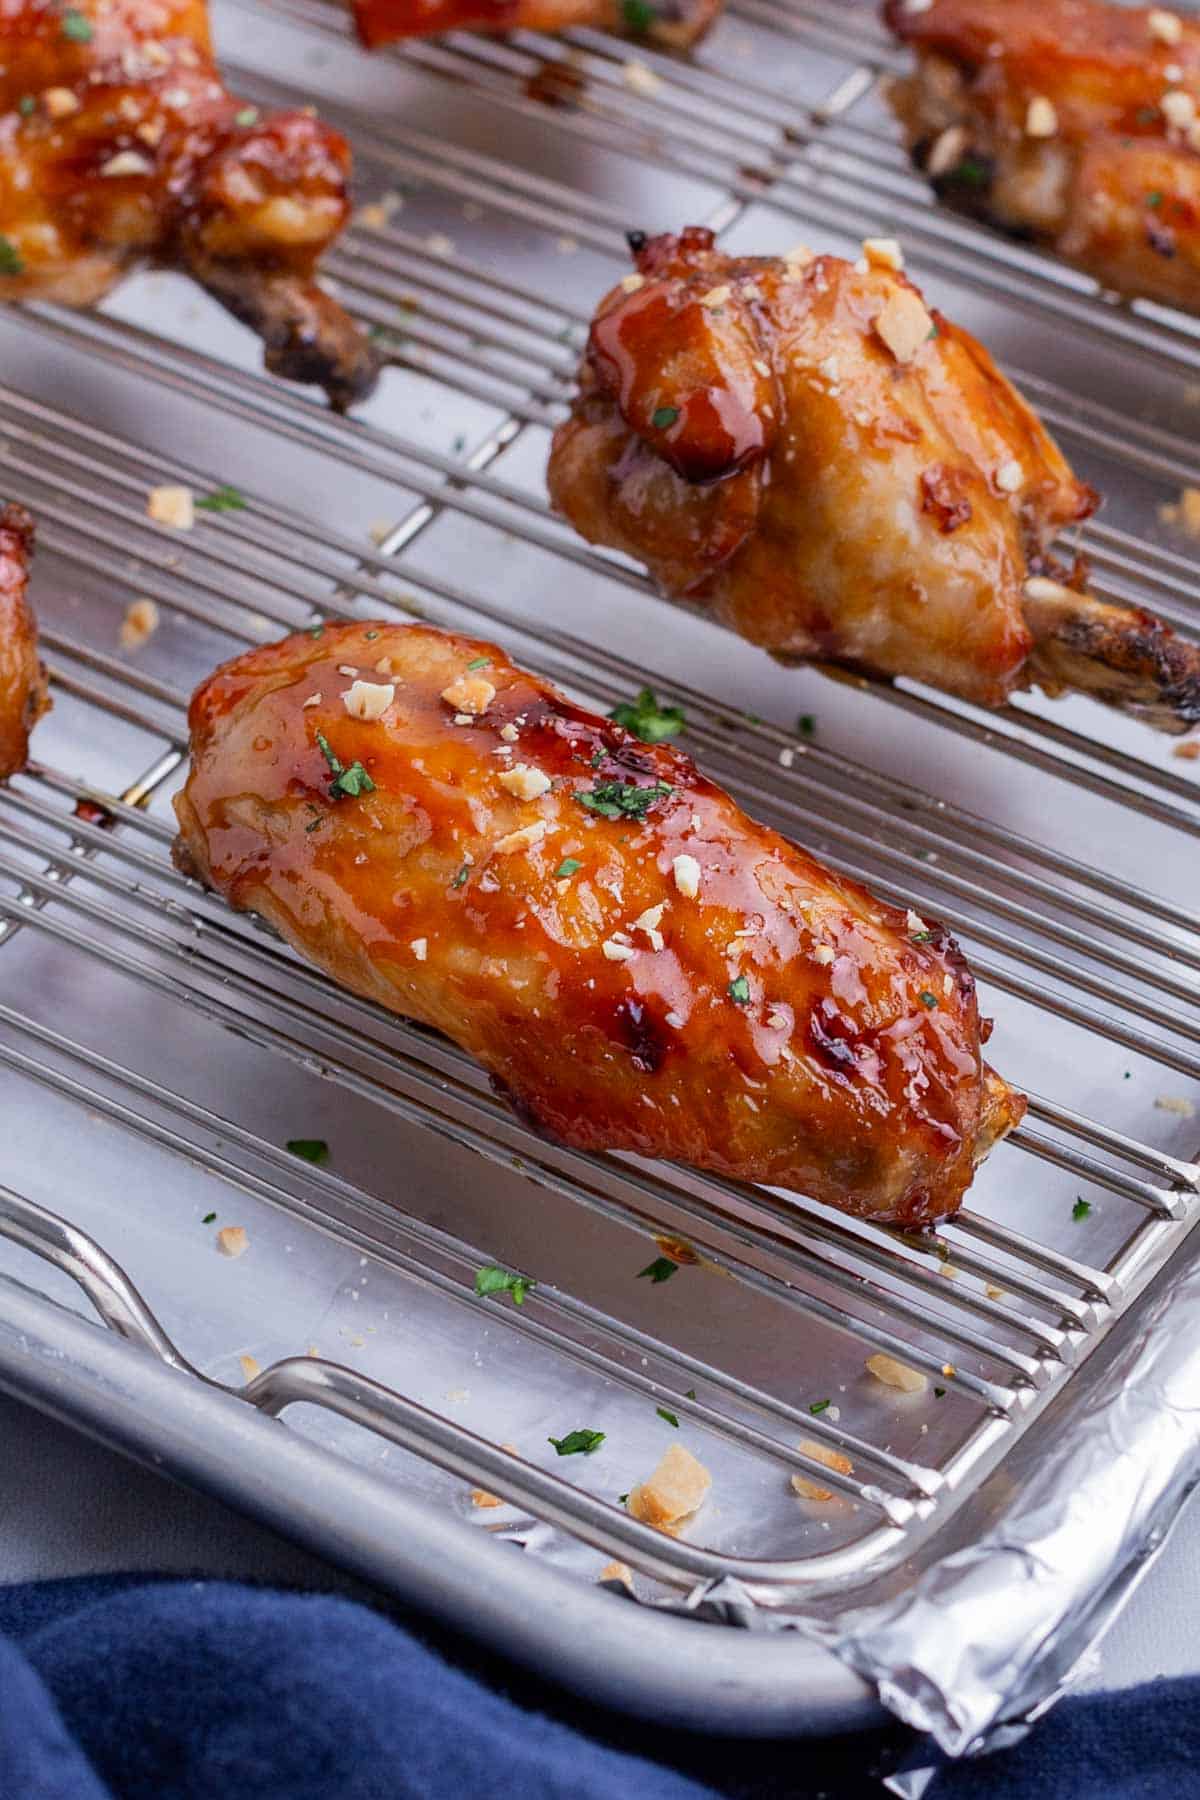 Asian chicken wings are baked in the oven.